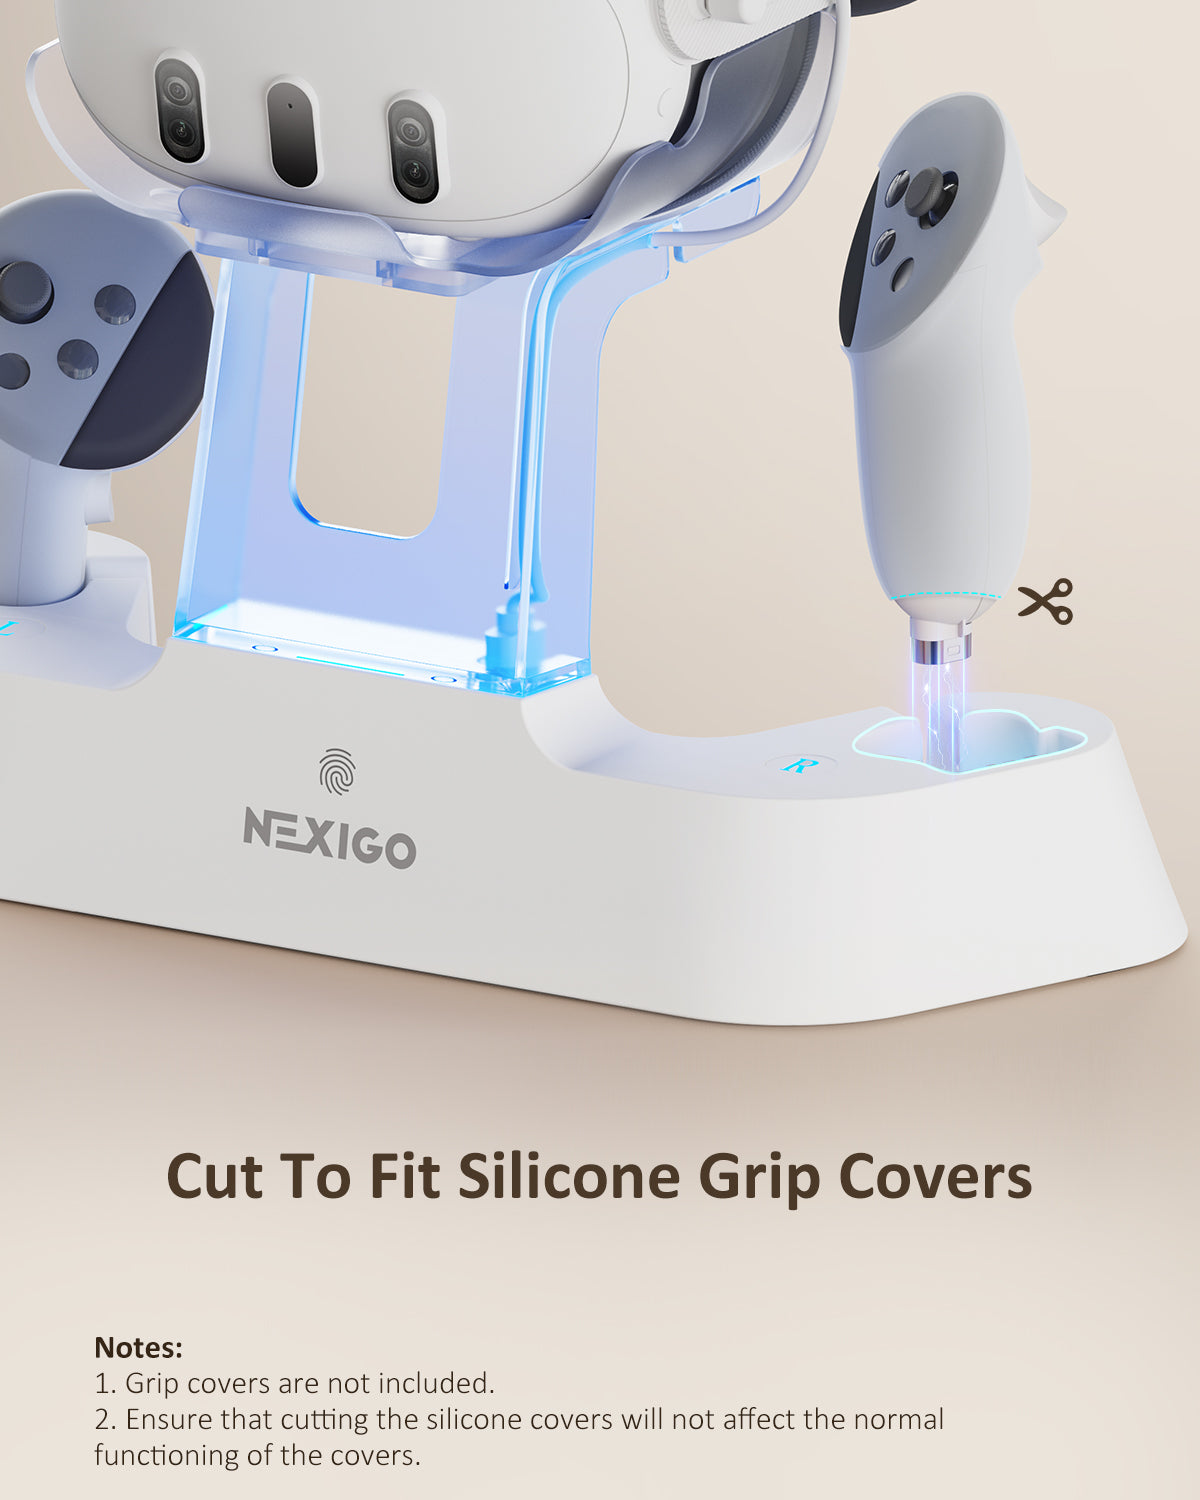 The charging dock is charging for the controller with cut silicone grip covers.